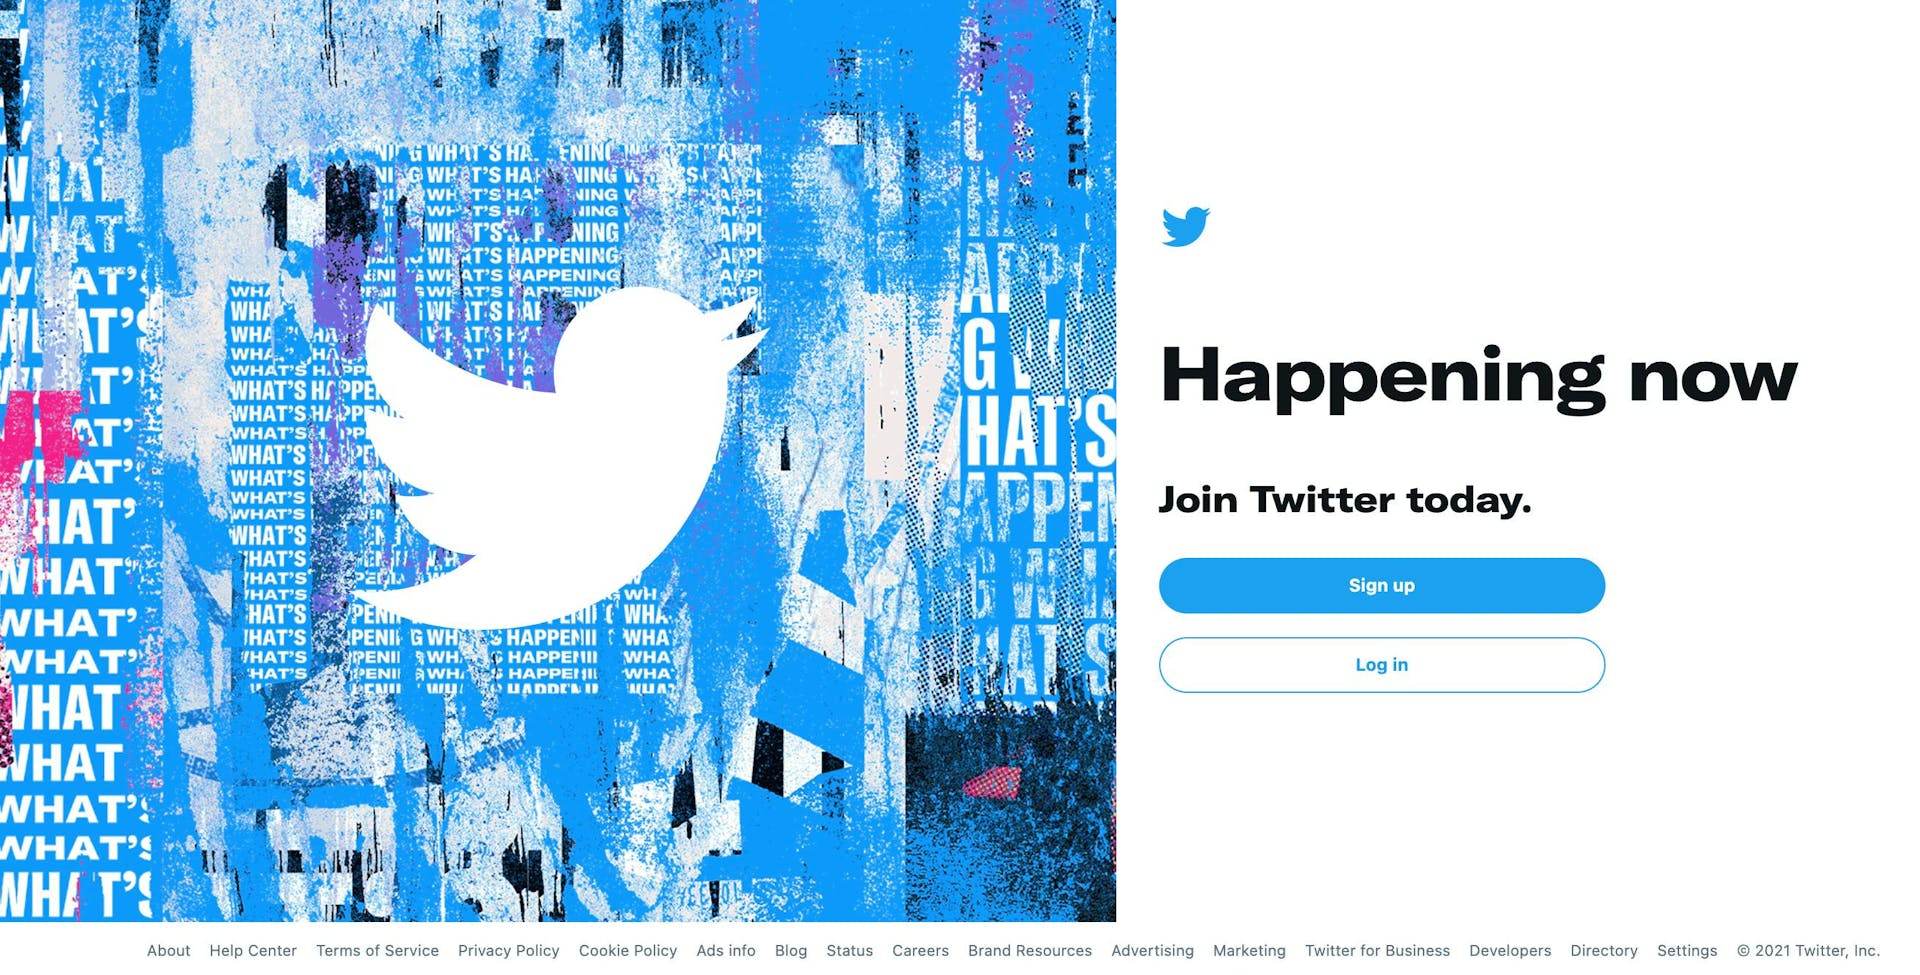 Twitter homepage showing buttons to log in our sign up